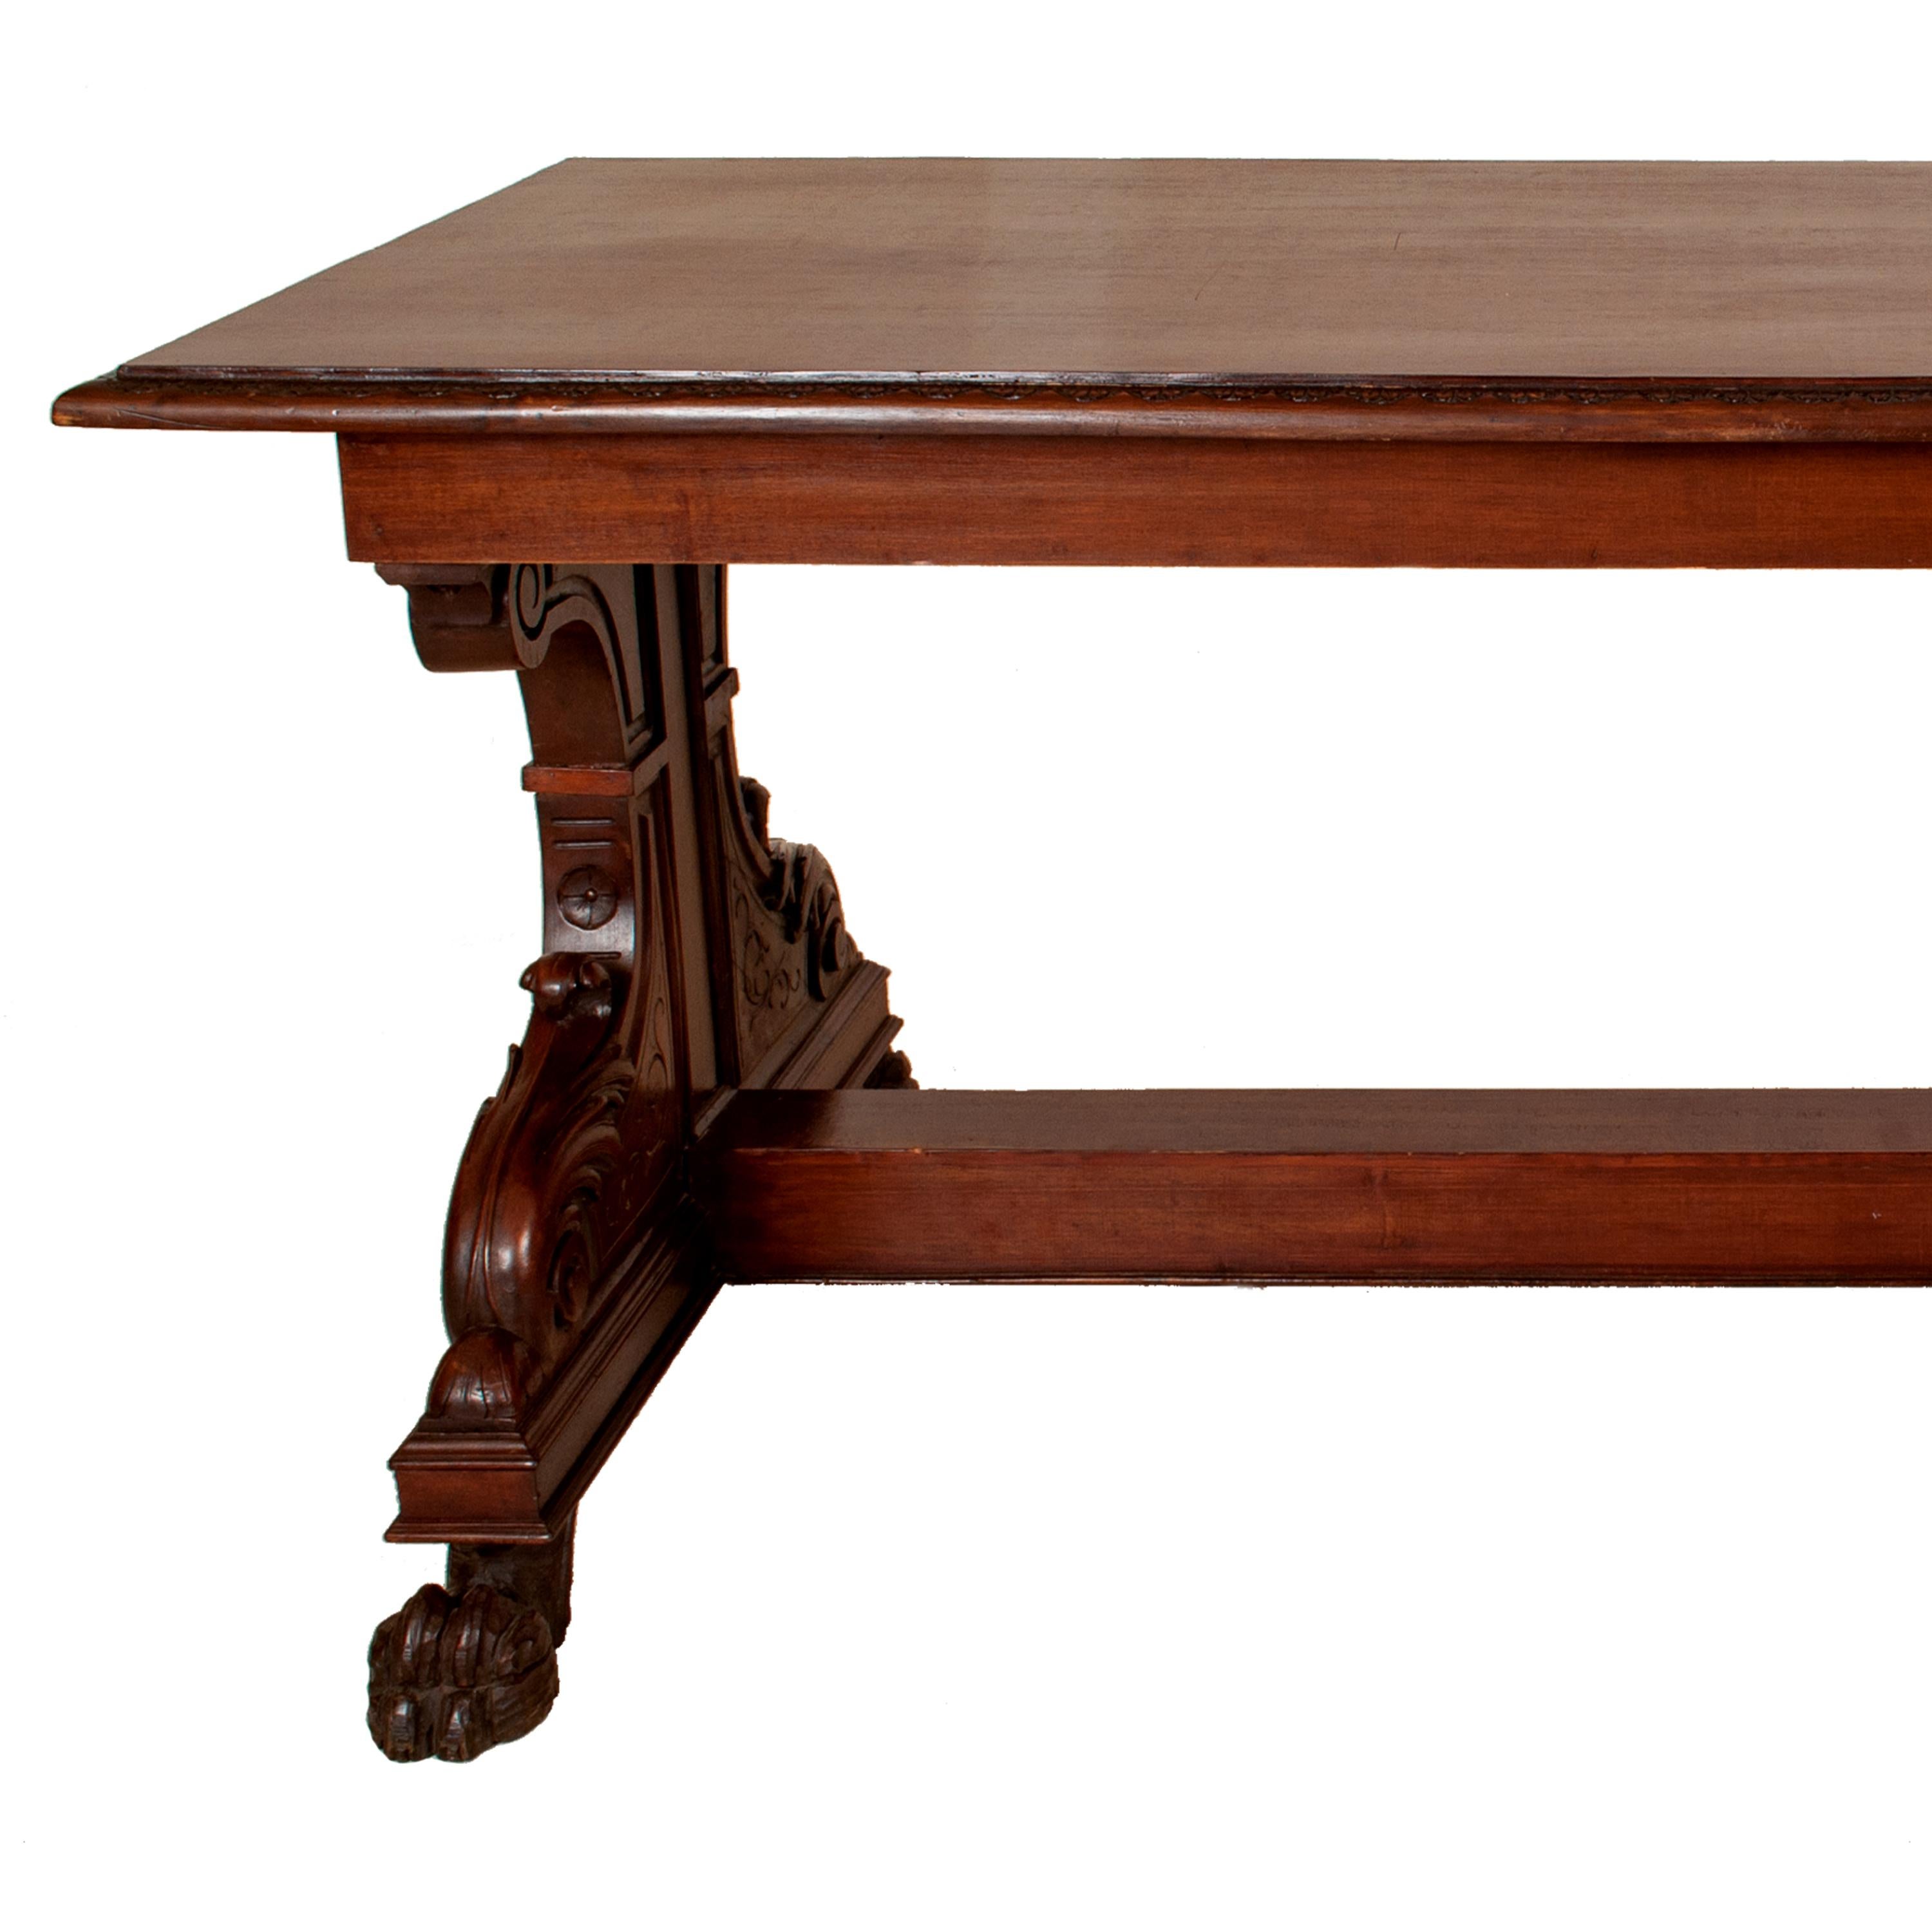 Antique Italian Carved Walnut Renaissance Revival Library Serving Table, 1870 For Sale 4